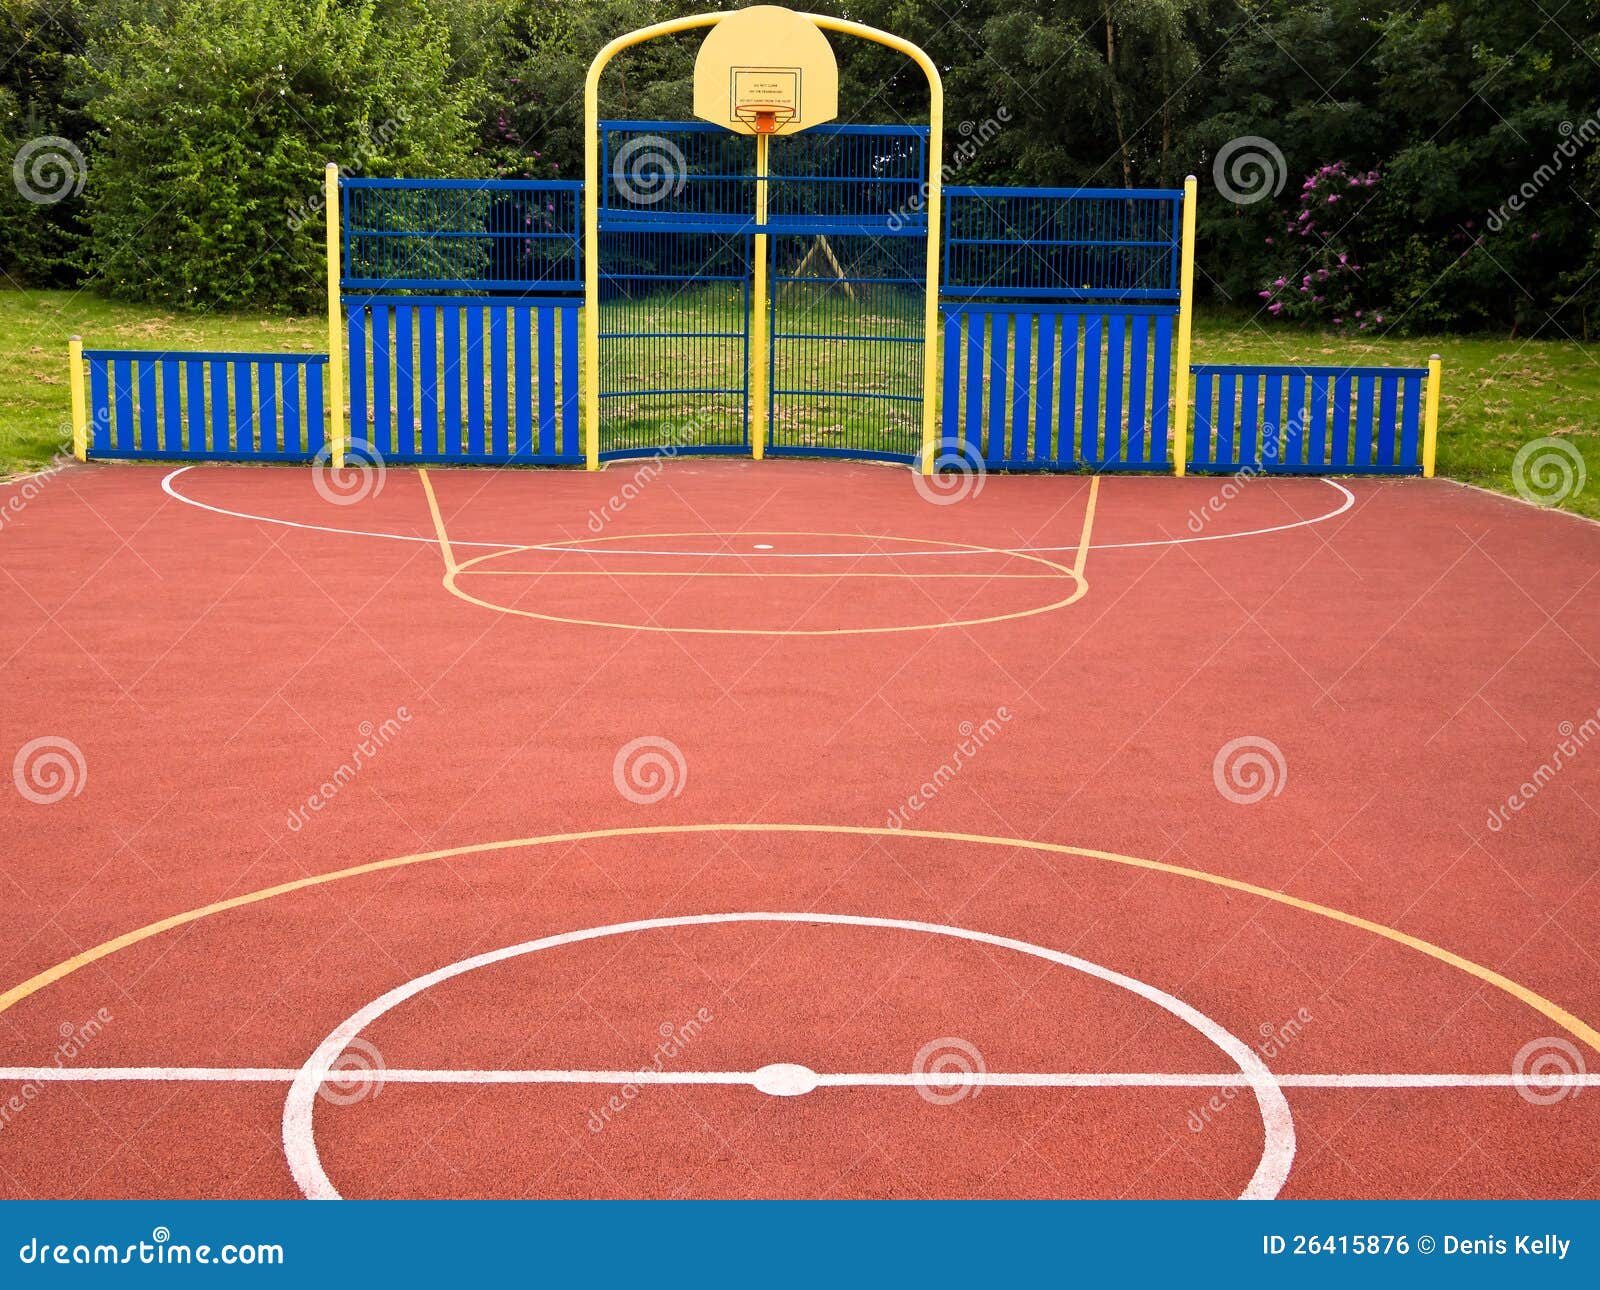 multi use sports activity games area